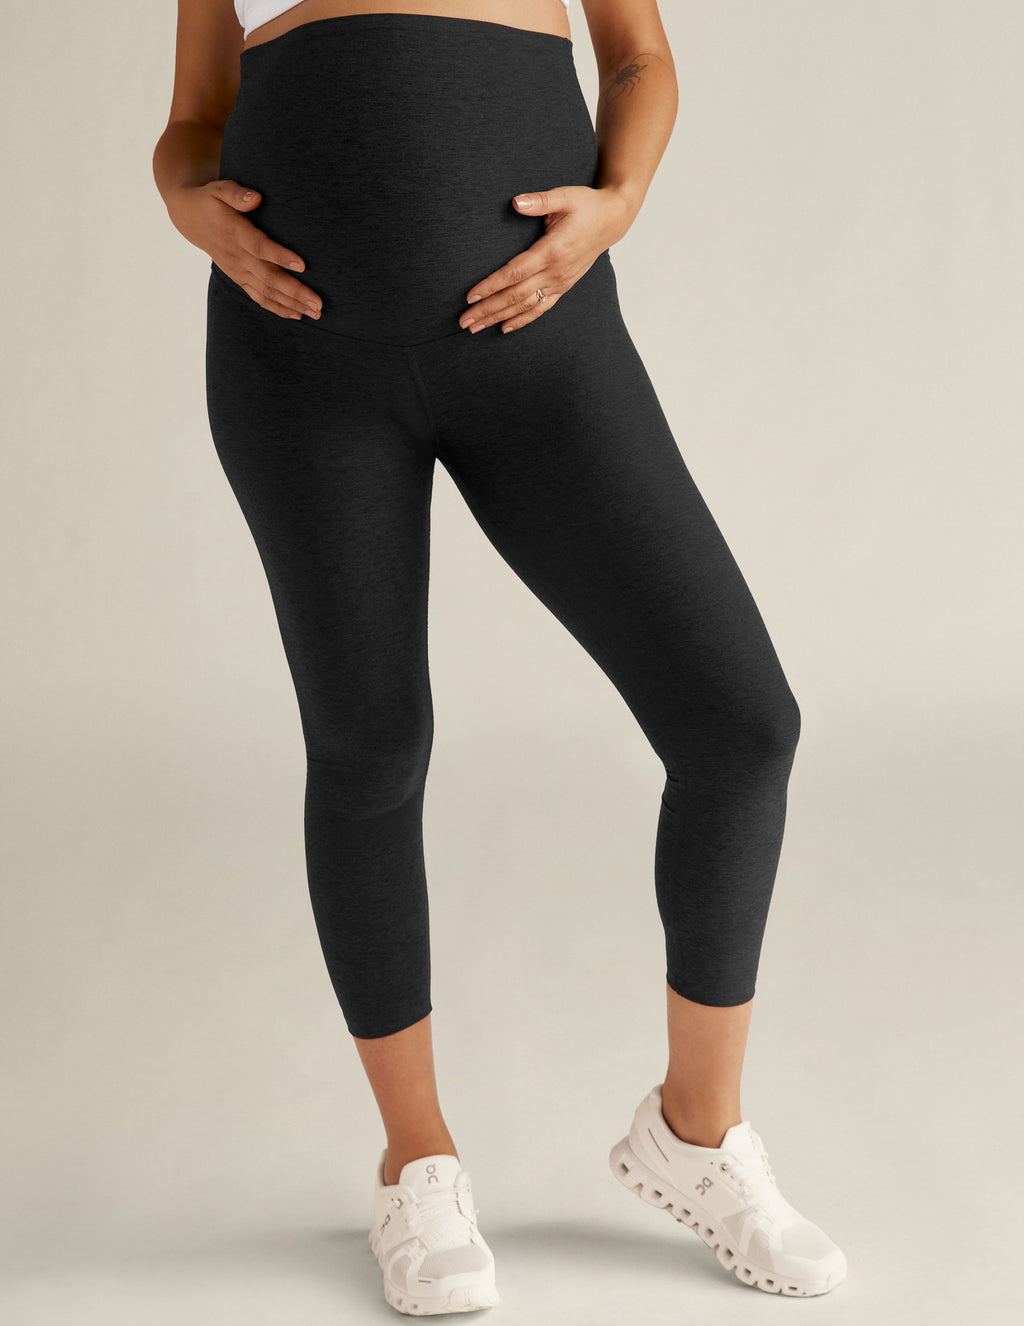 KUMAYES Maternity Leggings for Women Over The Belly Pregnancy Pants with  Full Panel Workout Leggings for Pregnant(Black Large) 